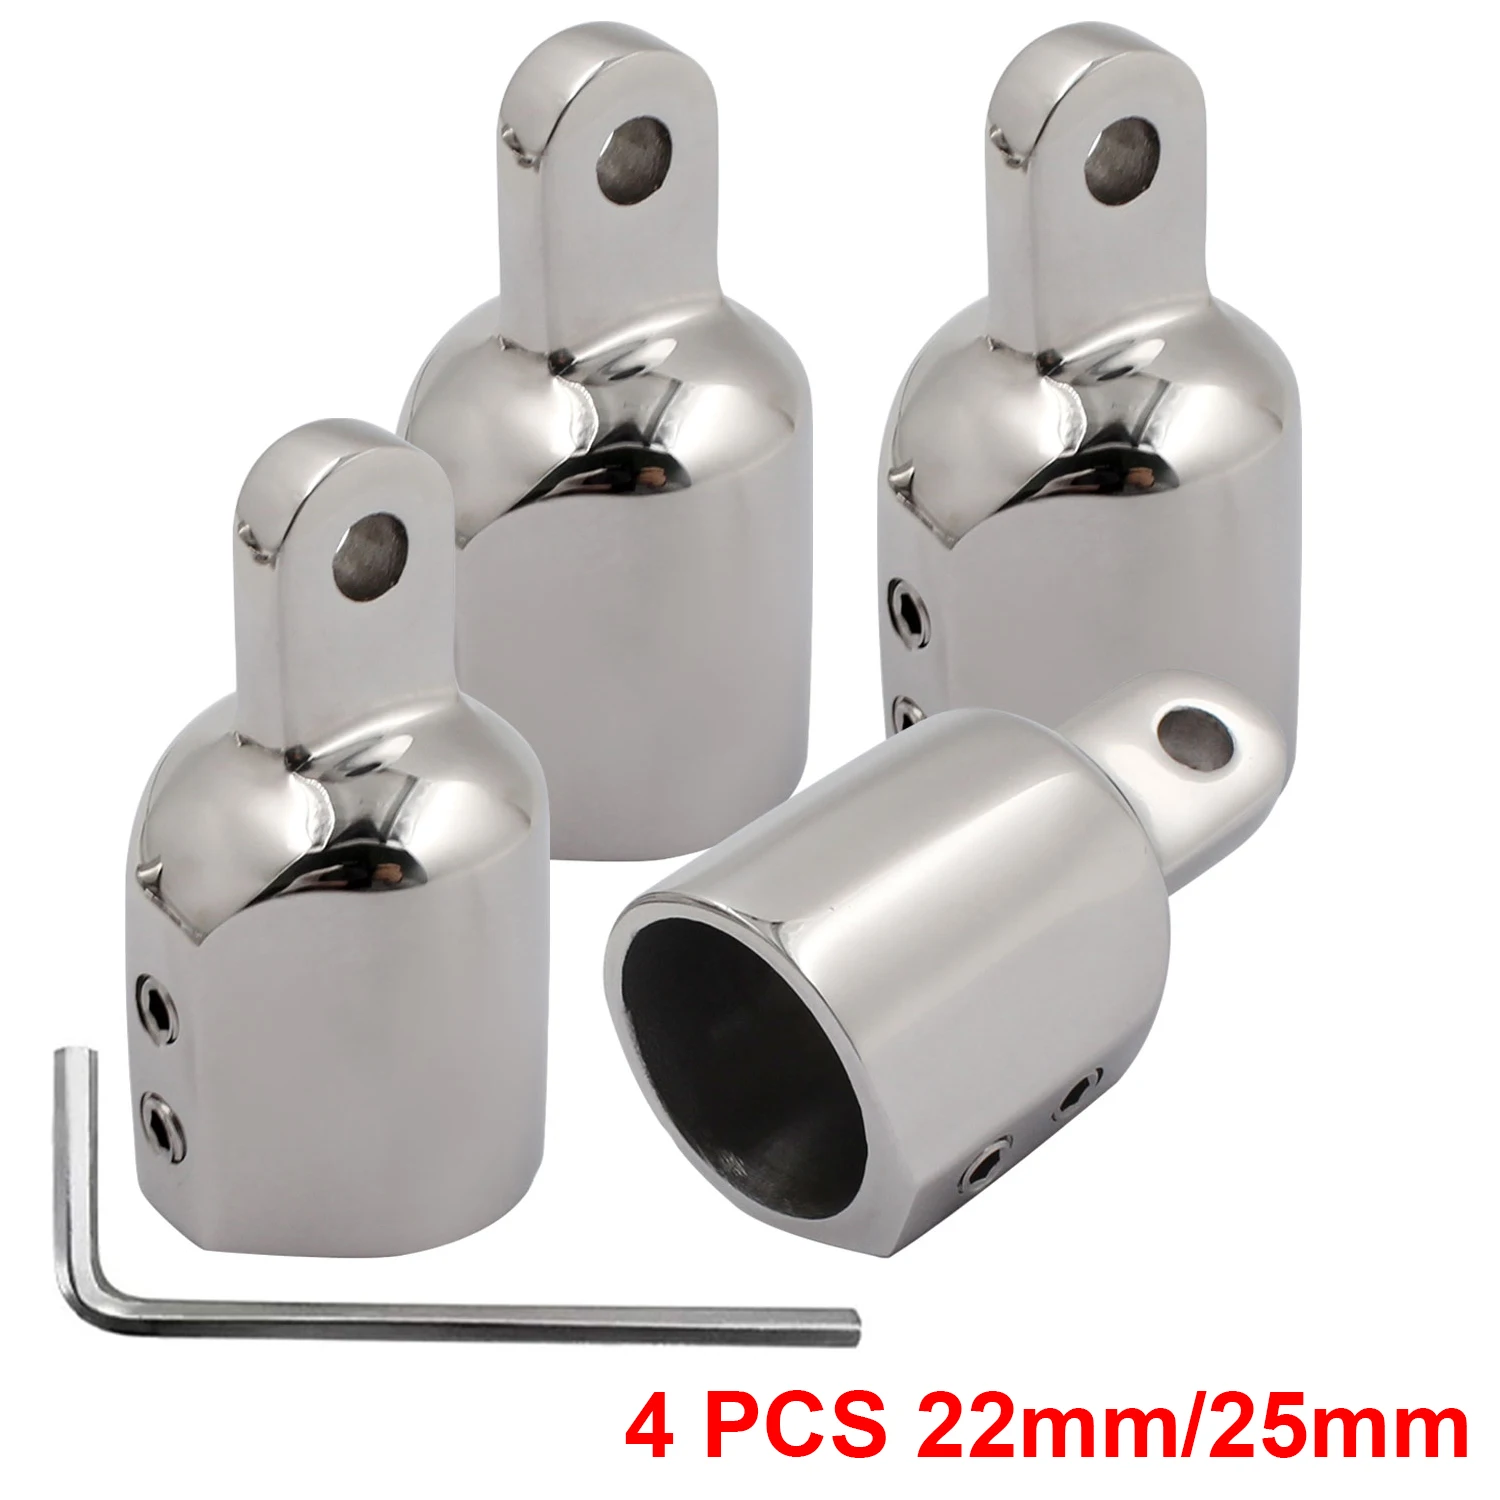 4 Pack 22mm/25mm Heavy Duty Bimini Top Cap Eye End Fitting Stainless Steel 316 Marine Hardware Boat External Eye End 2 pcs boat bimini top fitting deck swivel hinge hardware mount 316 stainless steel with screws